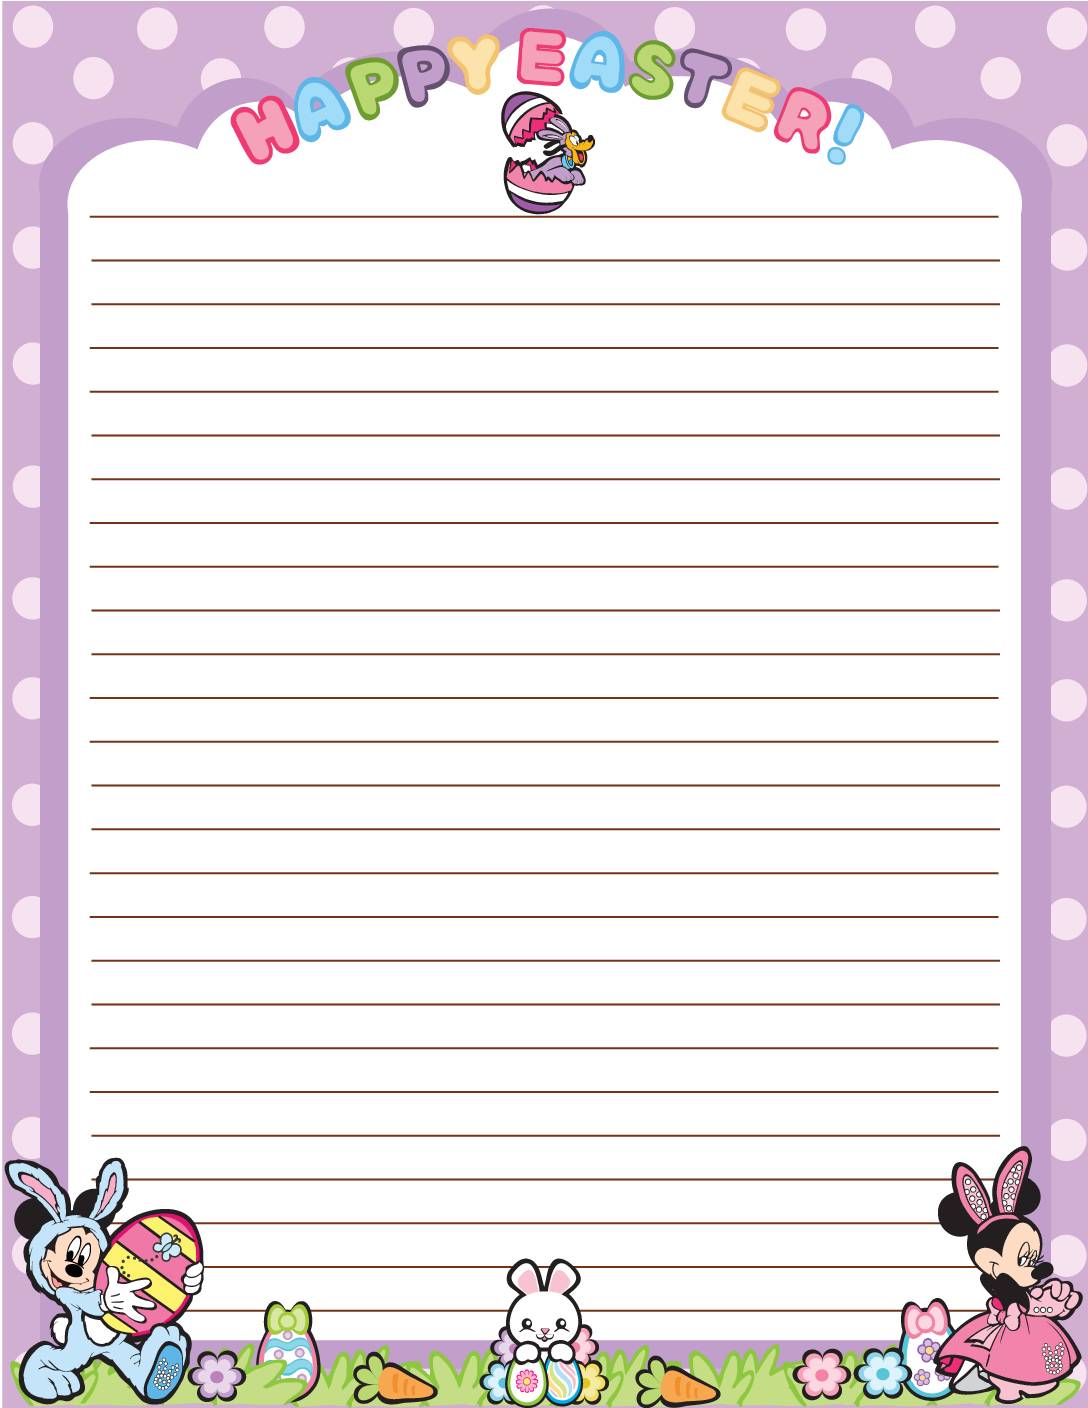 Stationery 2 Mickey Mouse Easter Stationery